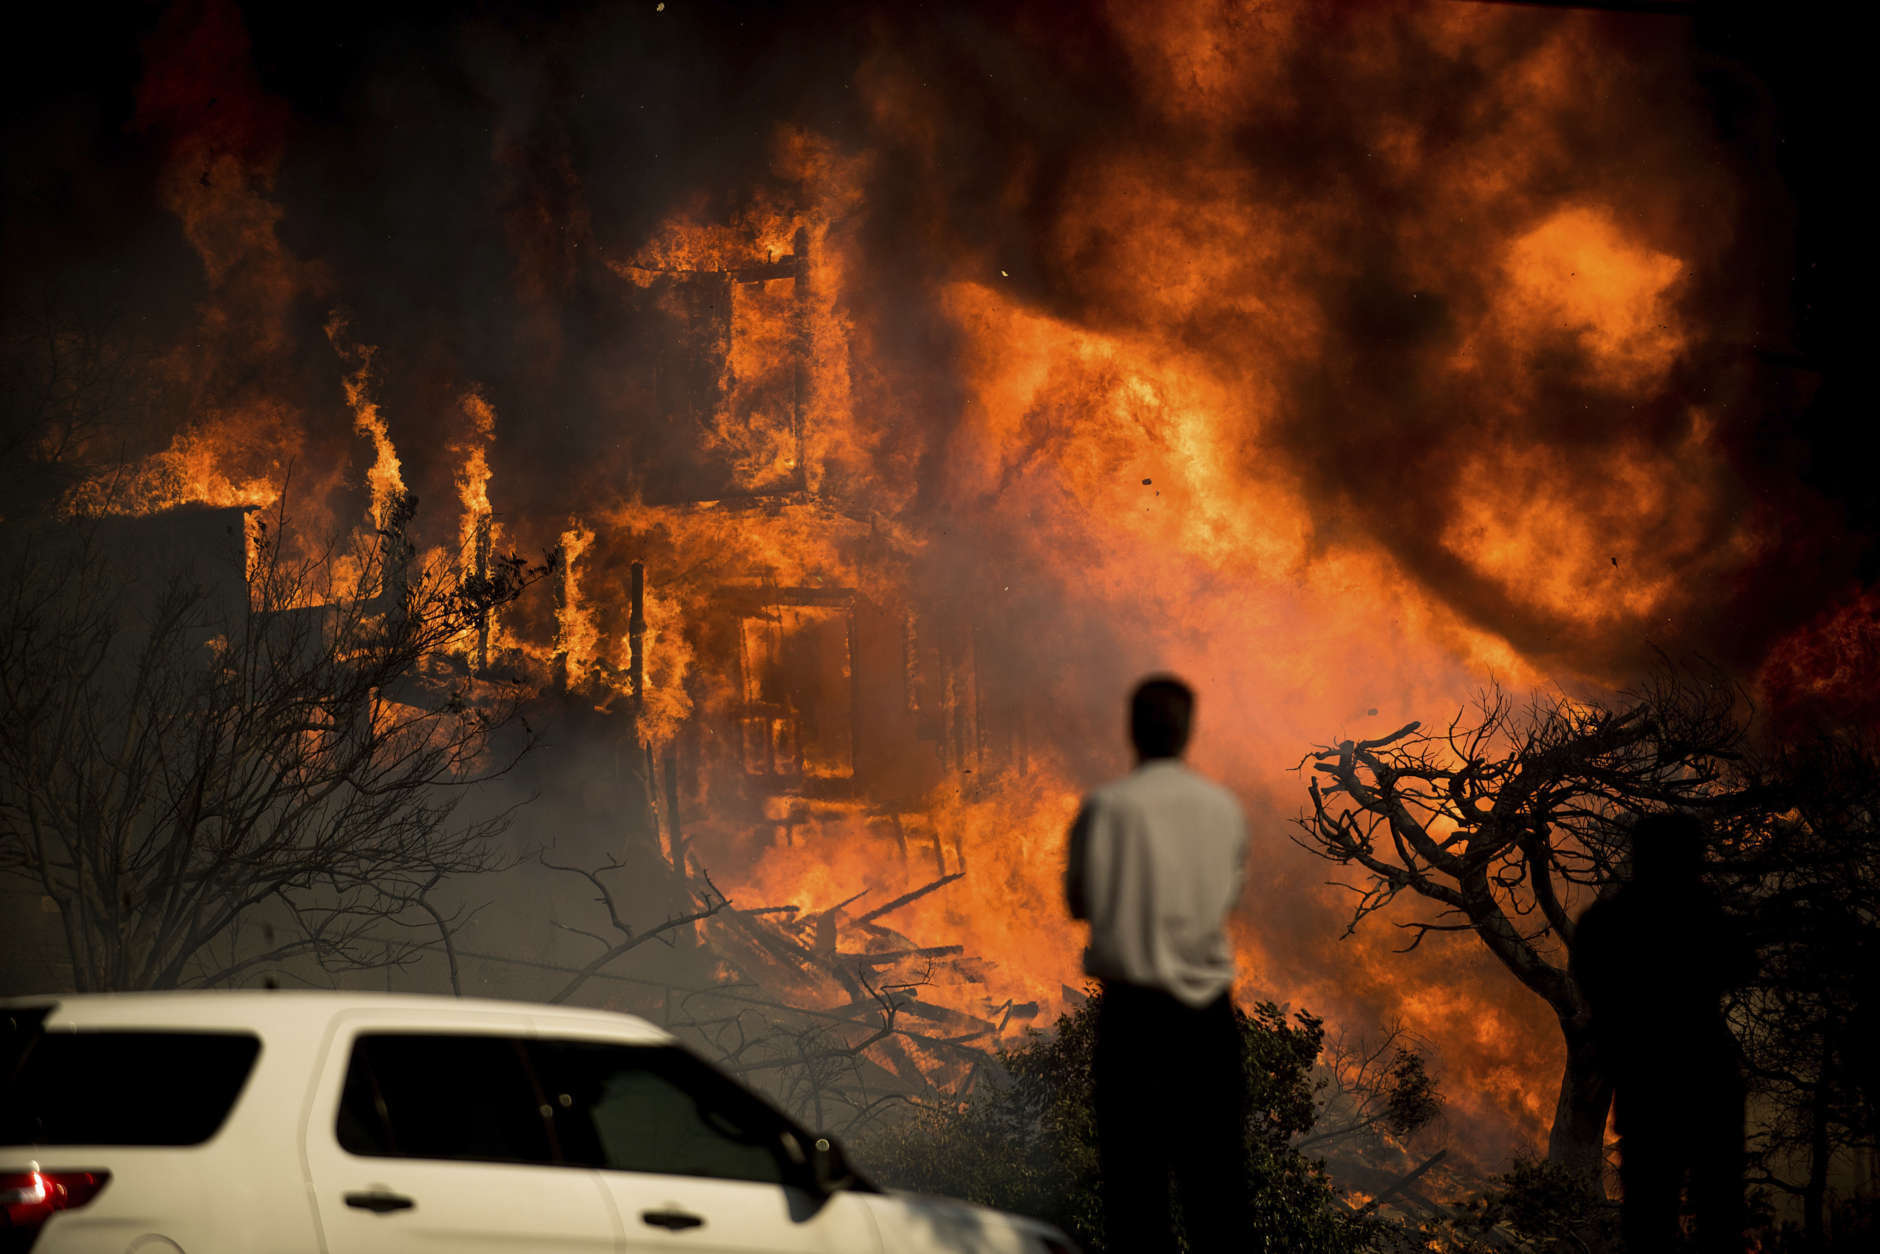 A man watches flames consume a residence as a wildfire rages in Ventura, Calif., Tuesday, Dec. 5, 2017. Ferocious winds in Southern California have whipped up explosive wildfires, burning a psychiatric hospital and scores of other structures. (AP Photo/Noah Berger)